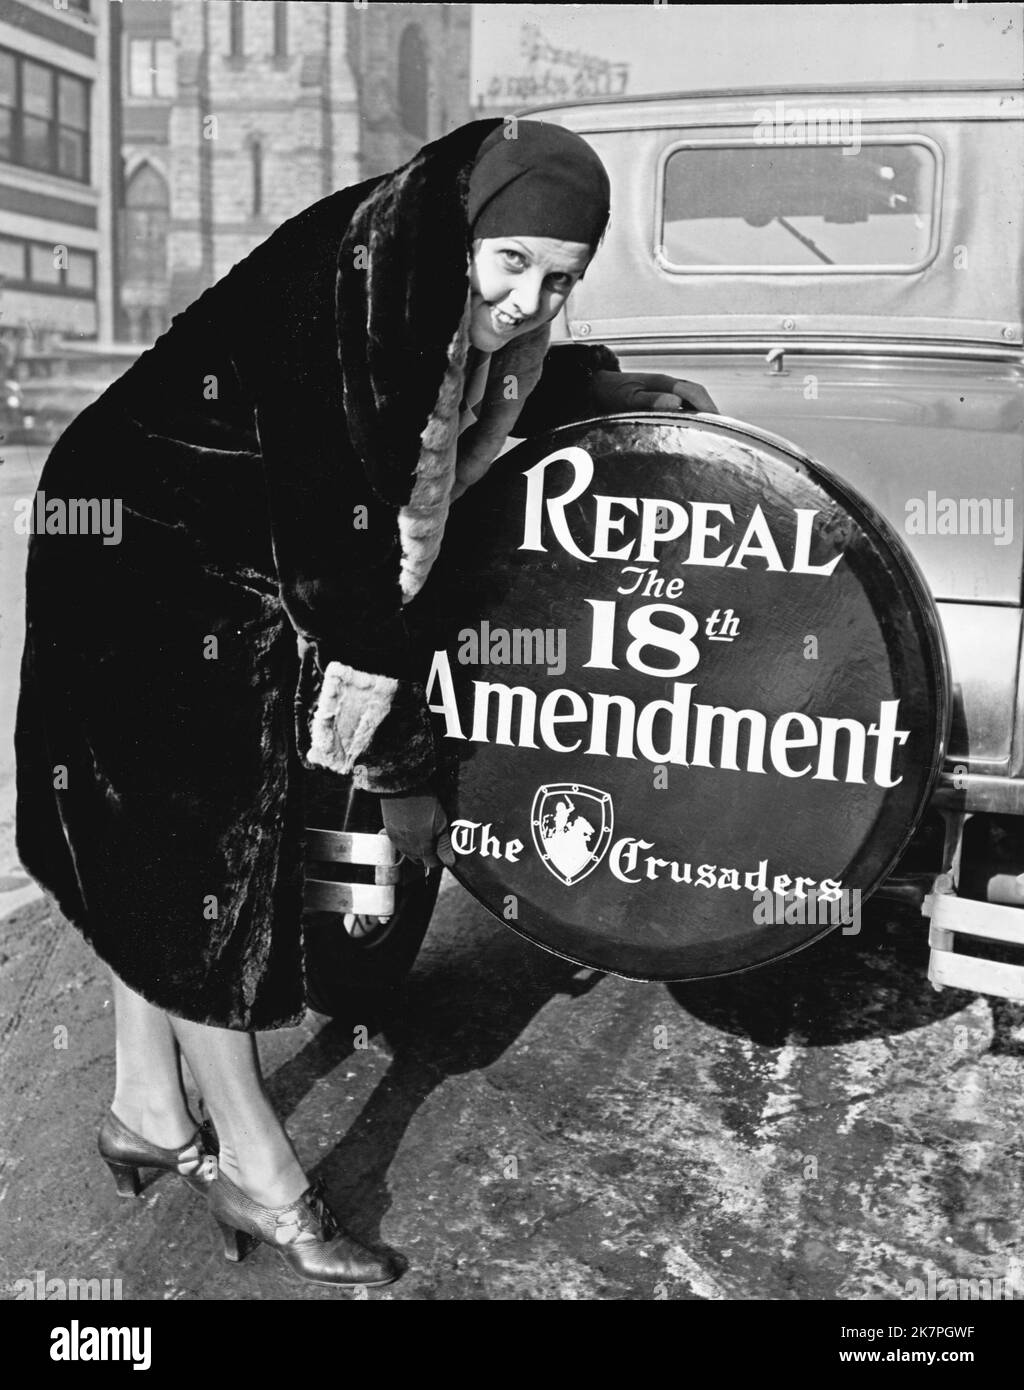 Prohibition. Miss Elizabeth Thompson was one of the first members of 'The Crusaders' national organization formed to overthrow prohibition, to put the new tire cover on her car. Miss Thompson with tire cover reading 'Repeal the 18th Amendment.' Stock Photo